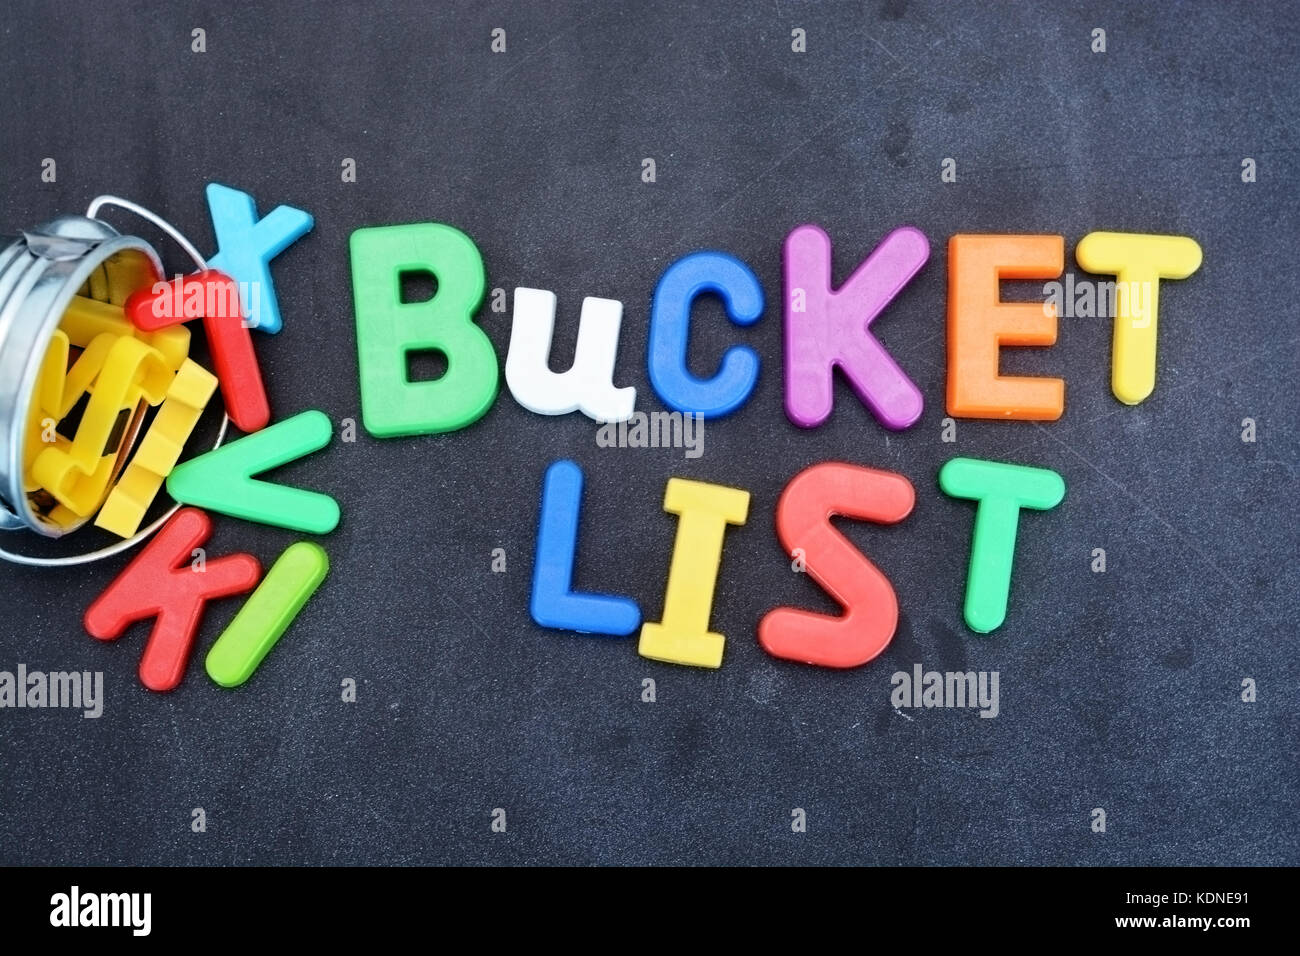 Bucket list concept, things to do in life with iron bucket and magnetic letters on chalkboard Stock Photo